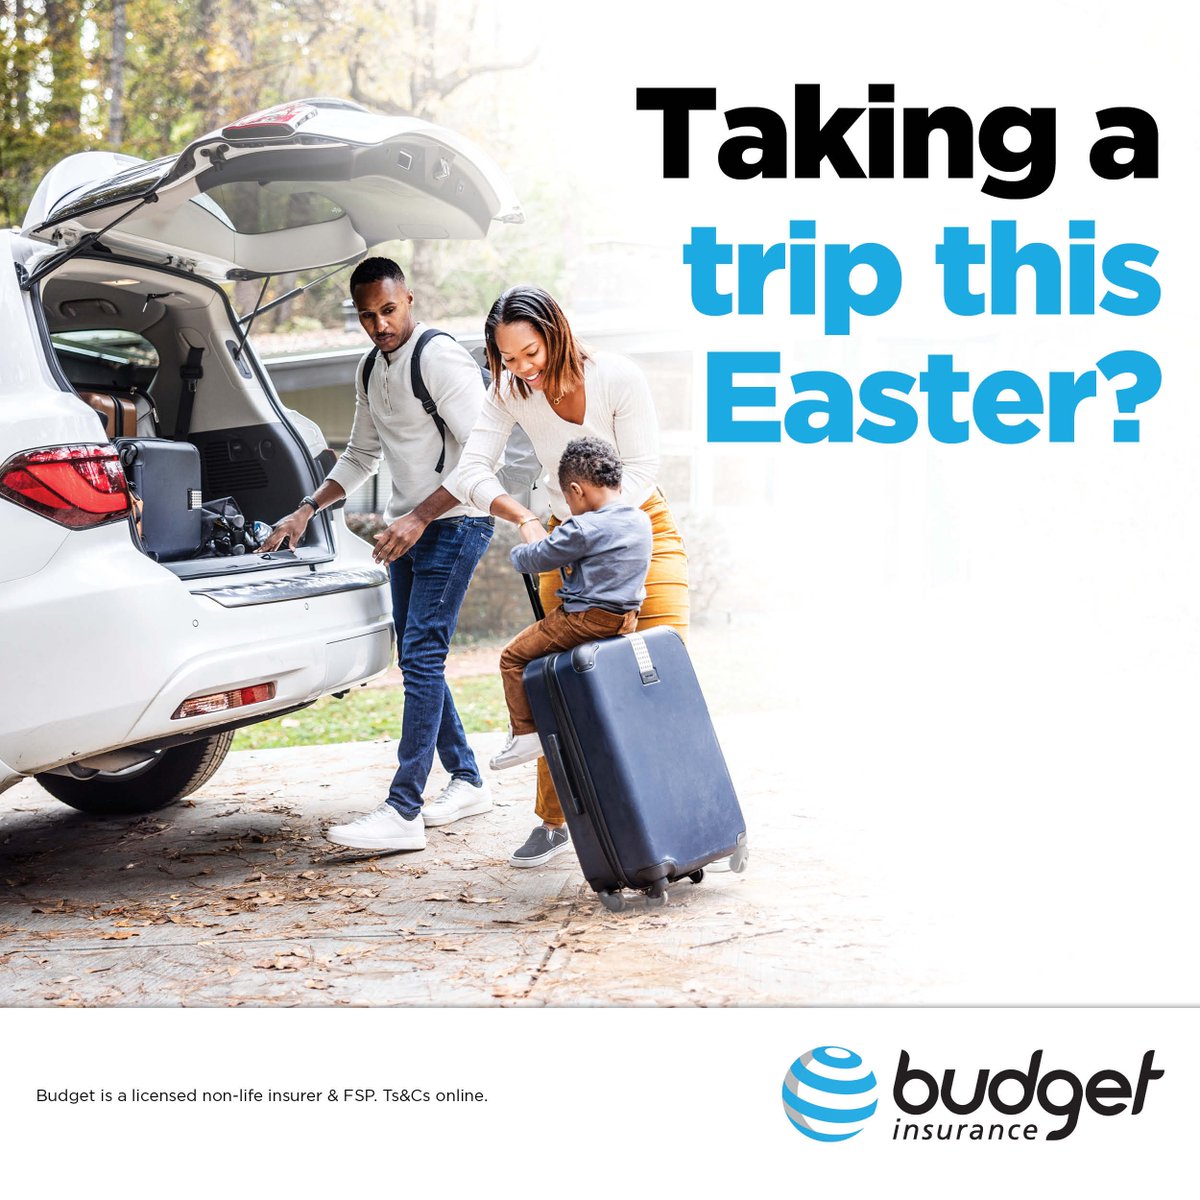 Going away for Easter? You should consider getting Home Contents cover, it protects the items in your home from being stolen or damaged. Get covered today: bit.ly/3x0e6dT